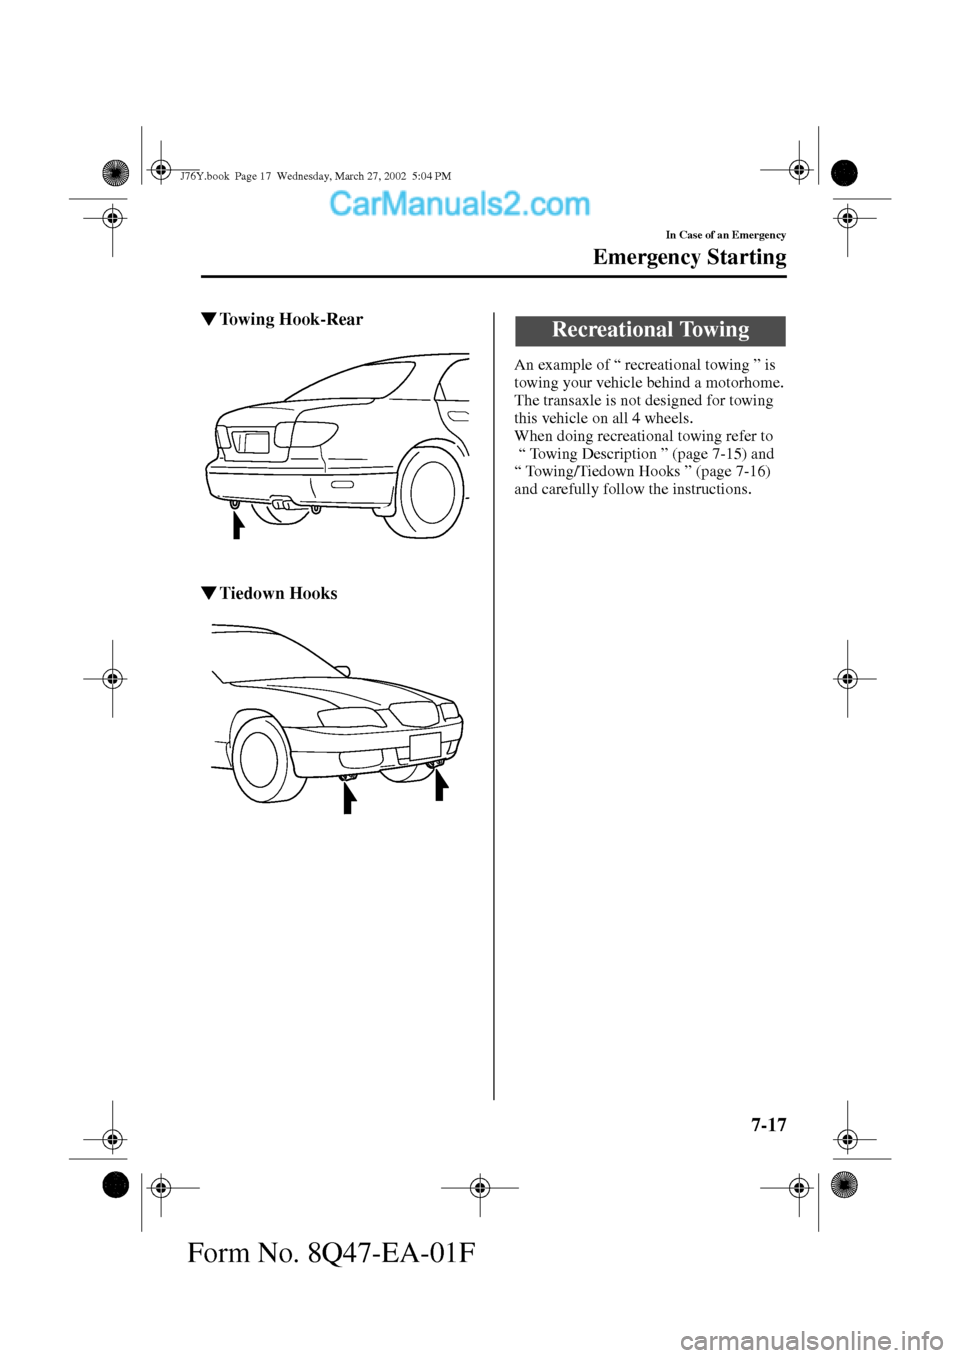 MAZDA MODEL MILLENIA 2002   (in English) Owners Guide 7-17
In Case of an Emergency
Emergency Starting
Form No. 8Q47-EA-01F
To w i n g  H o o k - R e a r
Tiedown Hooks
An example of “ recreational towing ” is 
towing your vehicle behind a motorhome.